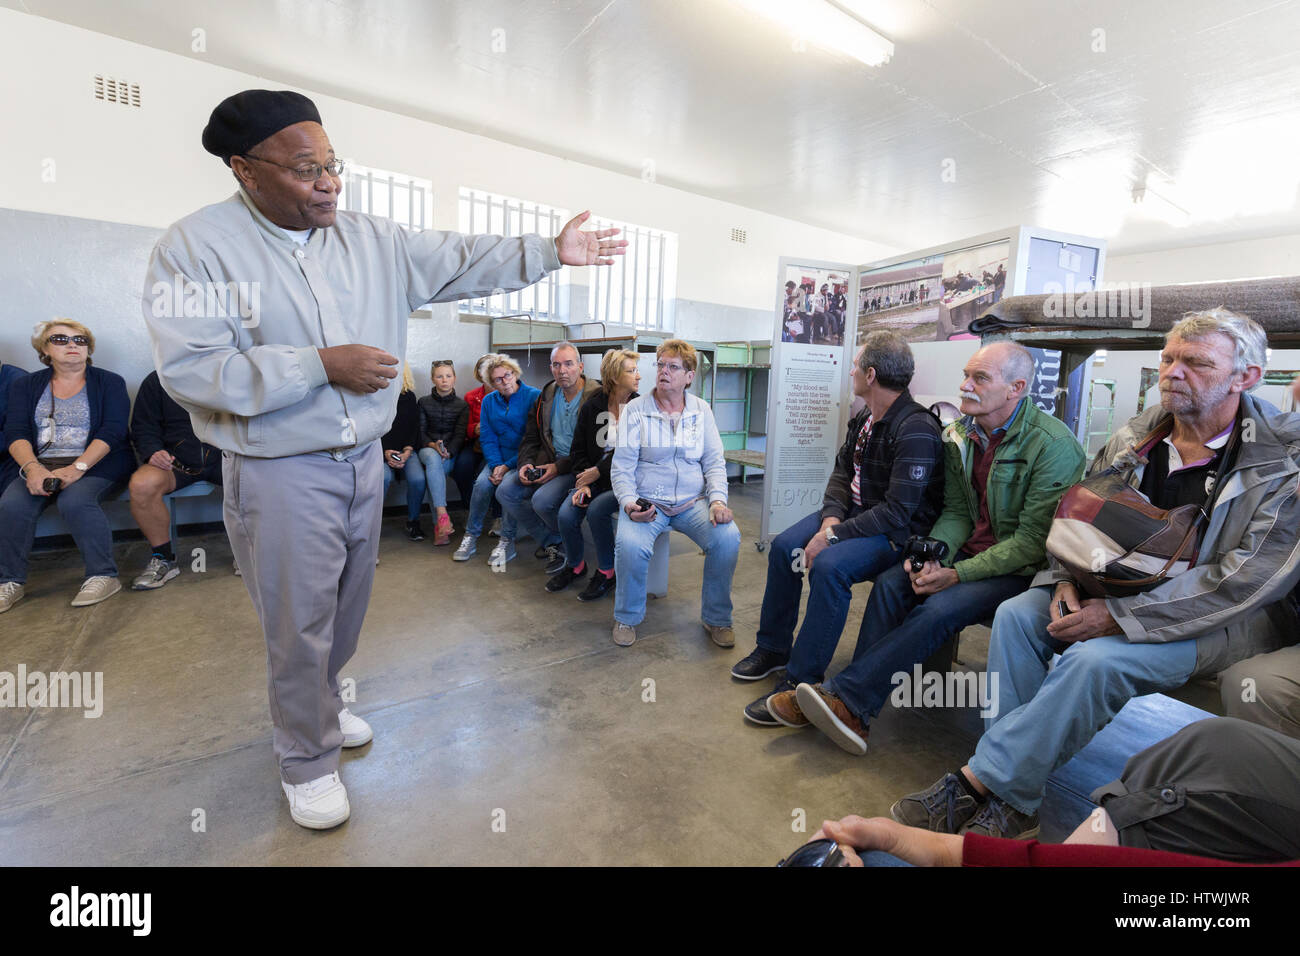 Robben Island Cape Town South Africa - Tourists on the Prison tour with guide, former inmate Ntando Mbatha Stock Photo